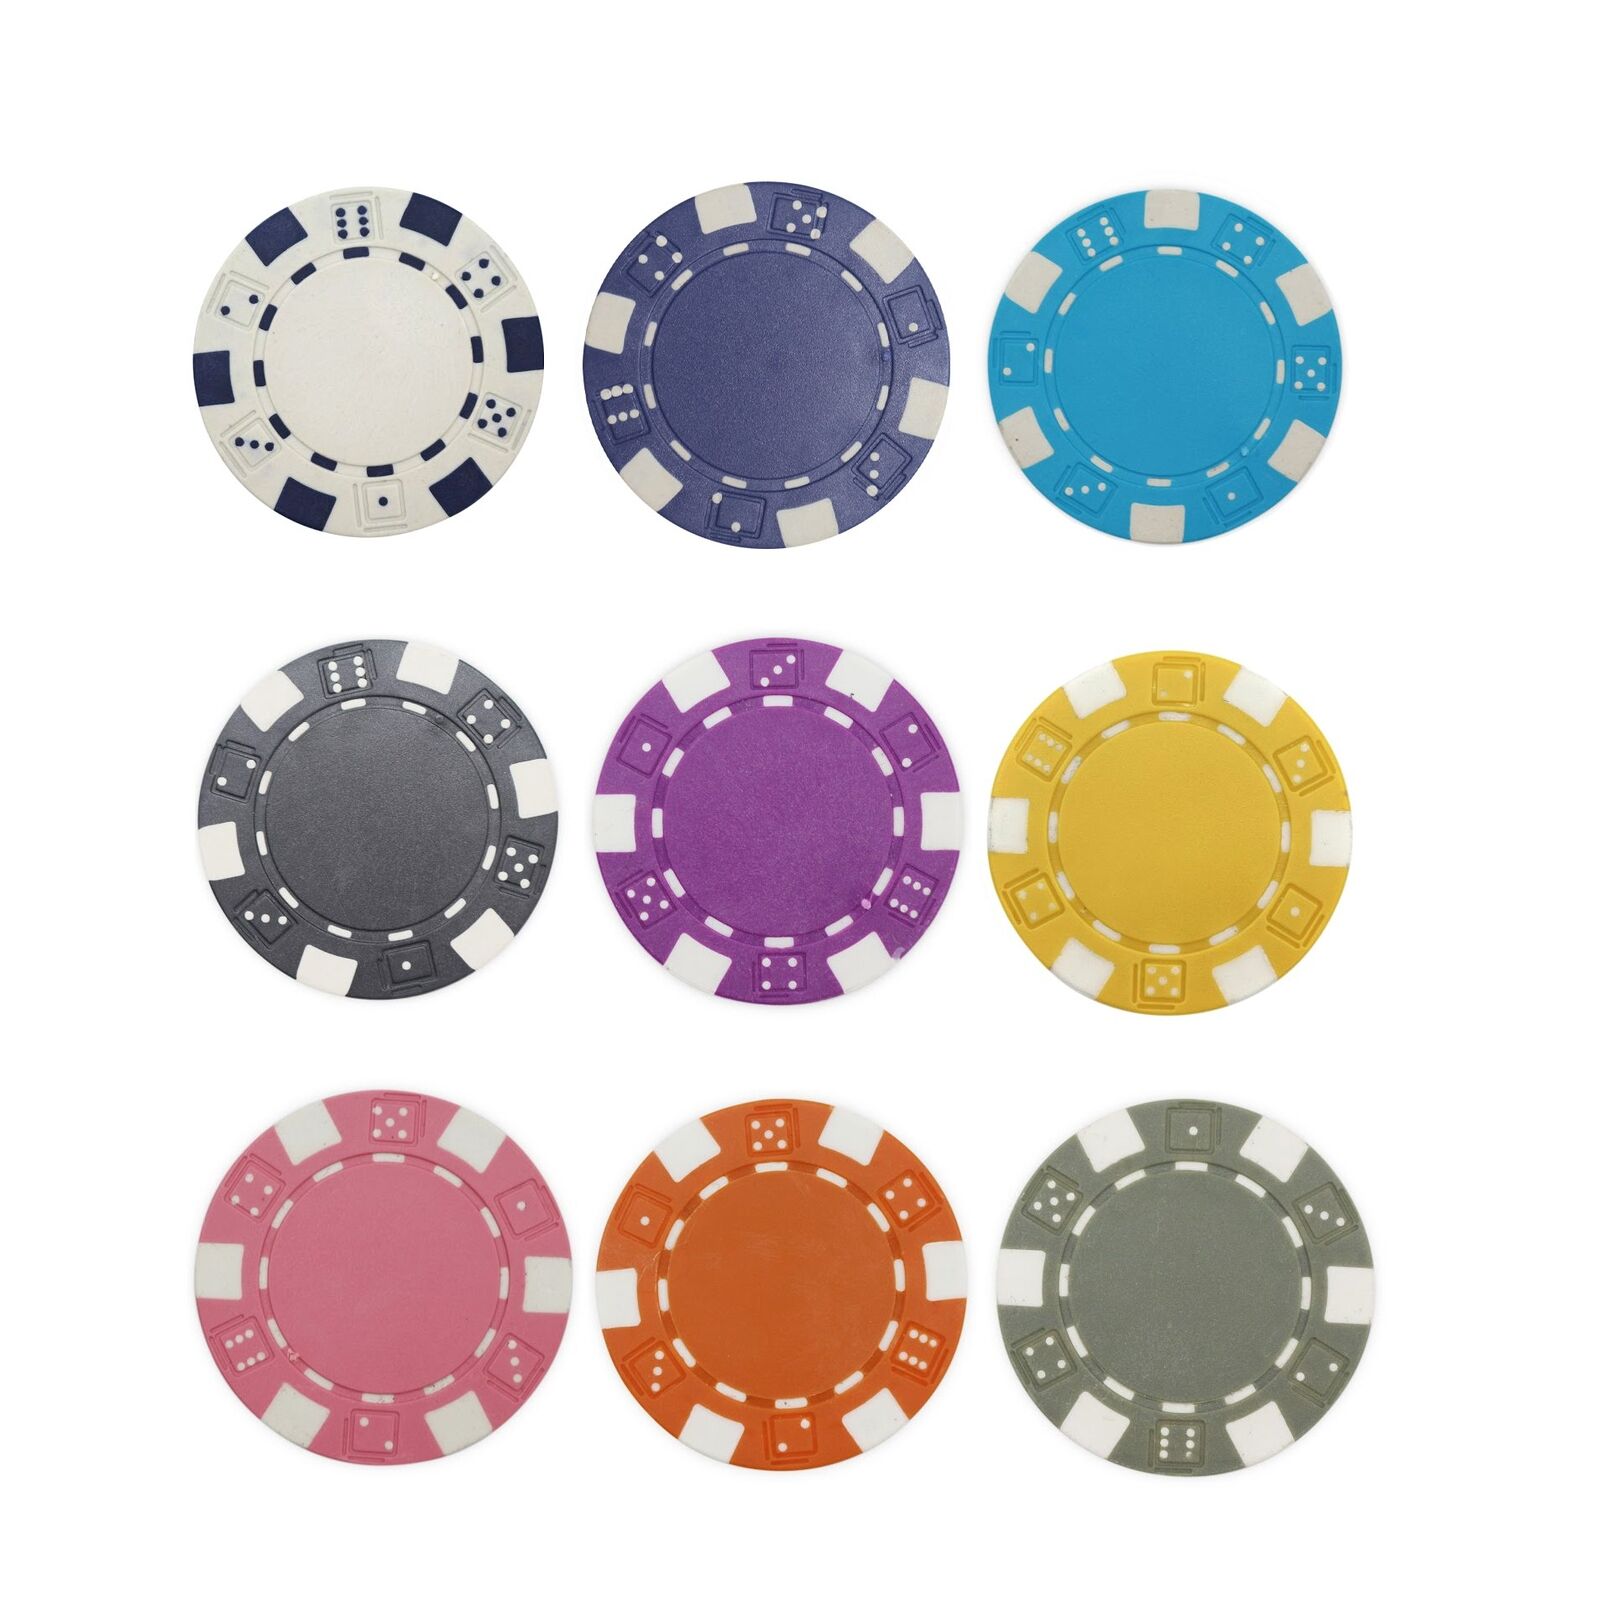 200 Dice Edge Poker Chips 11.5 gram - Pick Your Colors